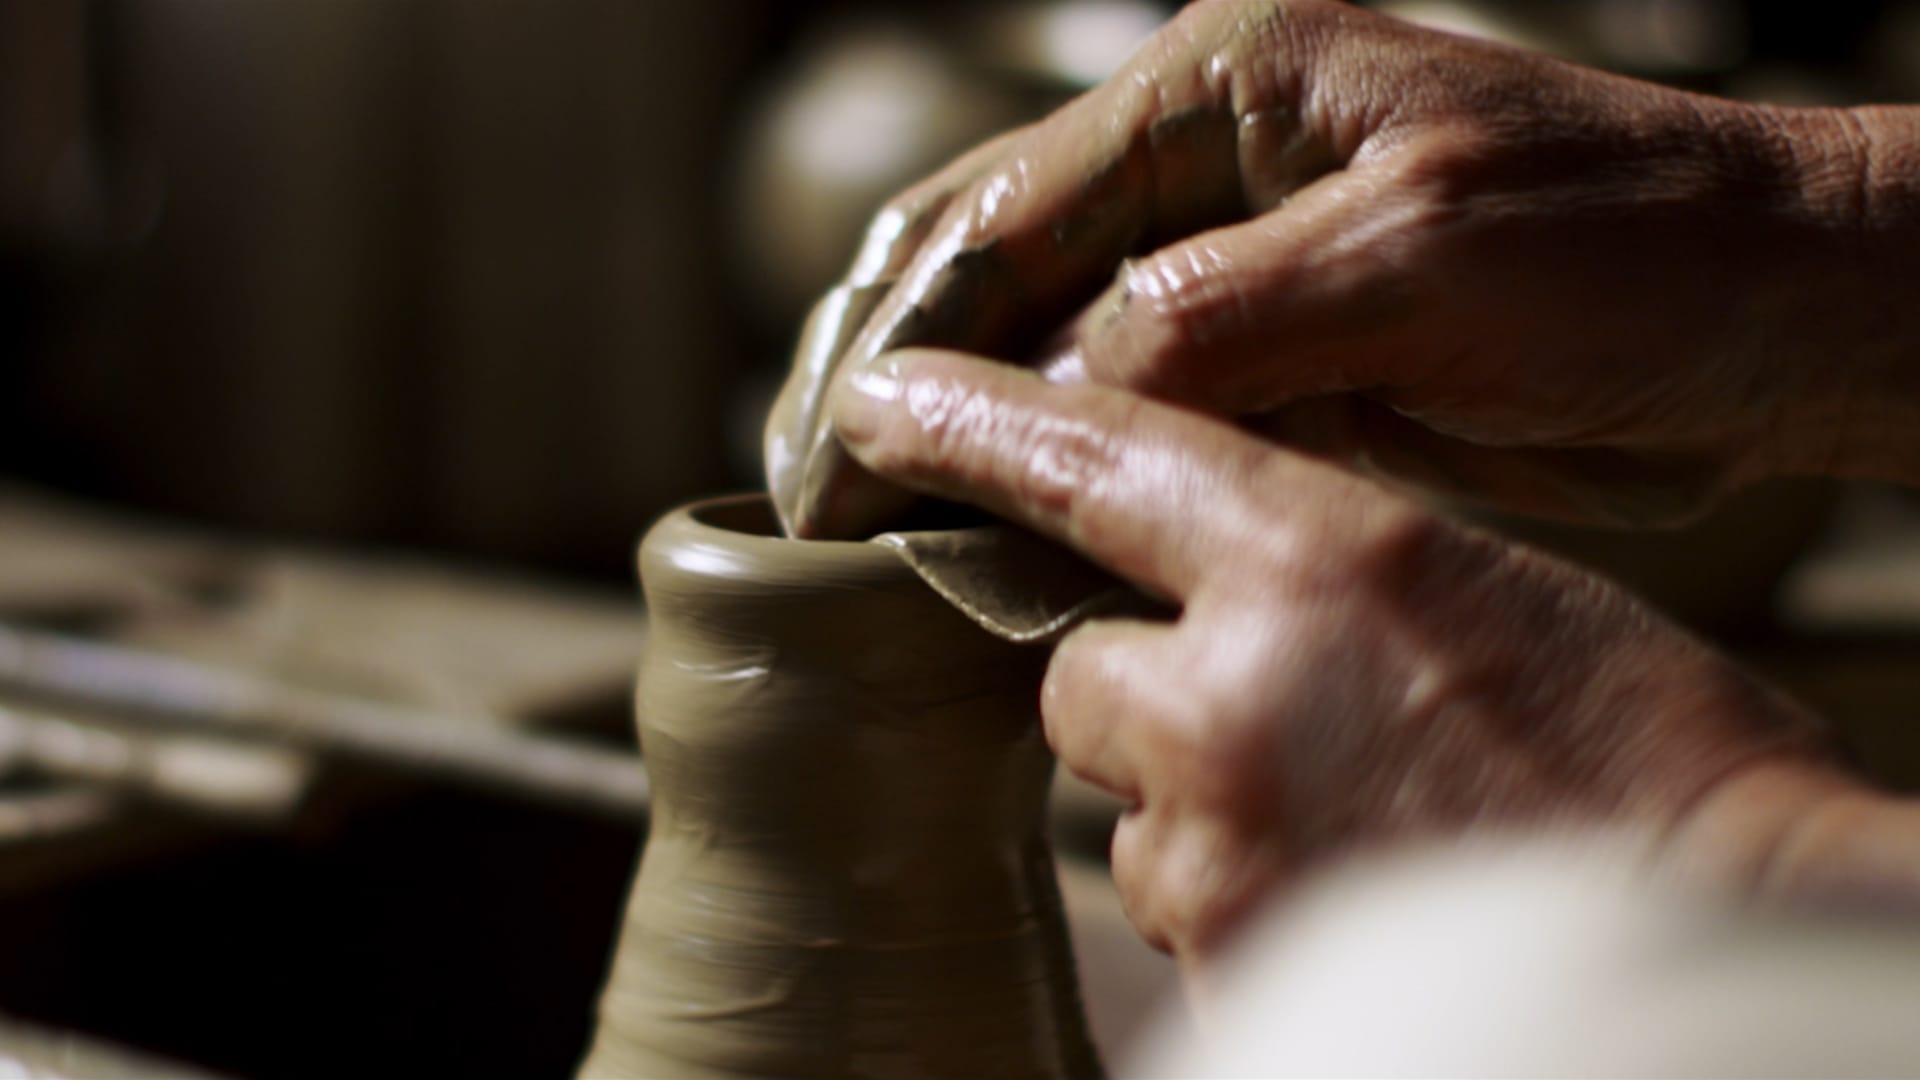 CARRYING ON THE PURSUIT OF BEAUTY IN THE ART OF POTTERY